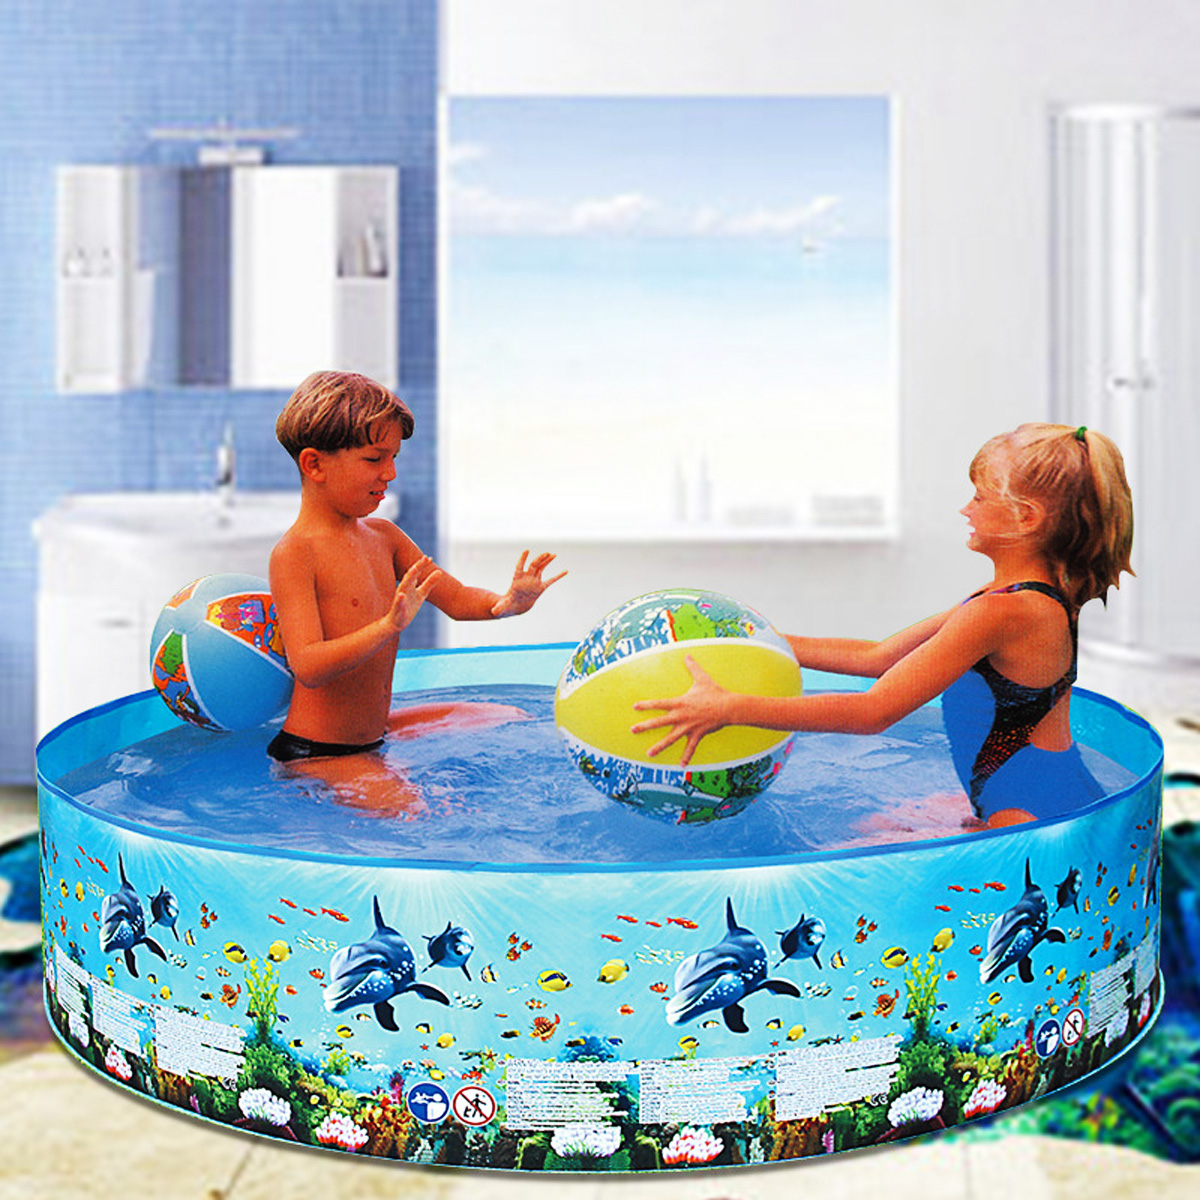 183244x38cm-No-Need-Inflatable-Swimming-Pool-Summer-Holiday-Children-Paddling-Pools-Beach-Family-Gam-1675411-4